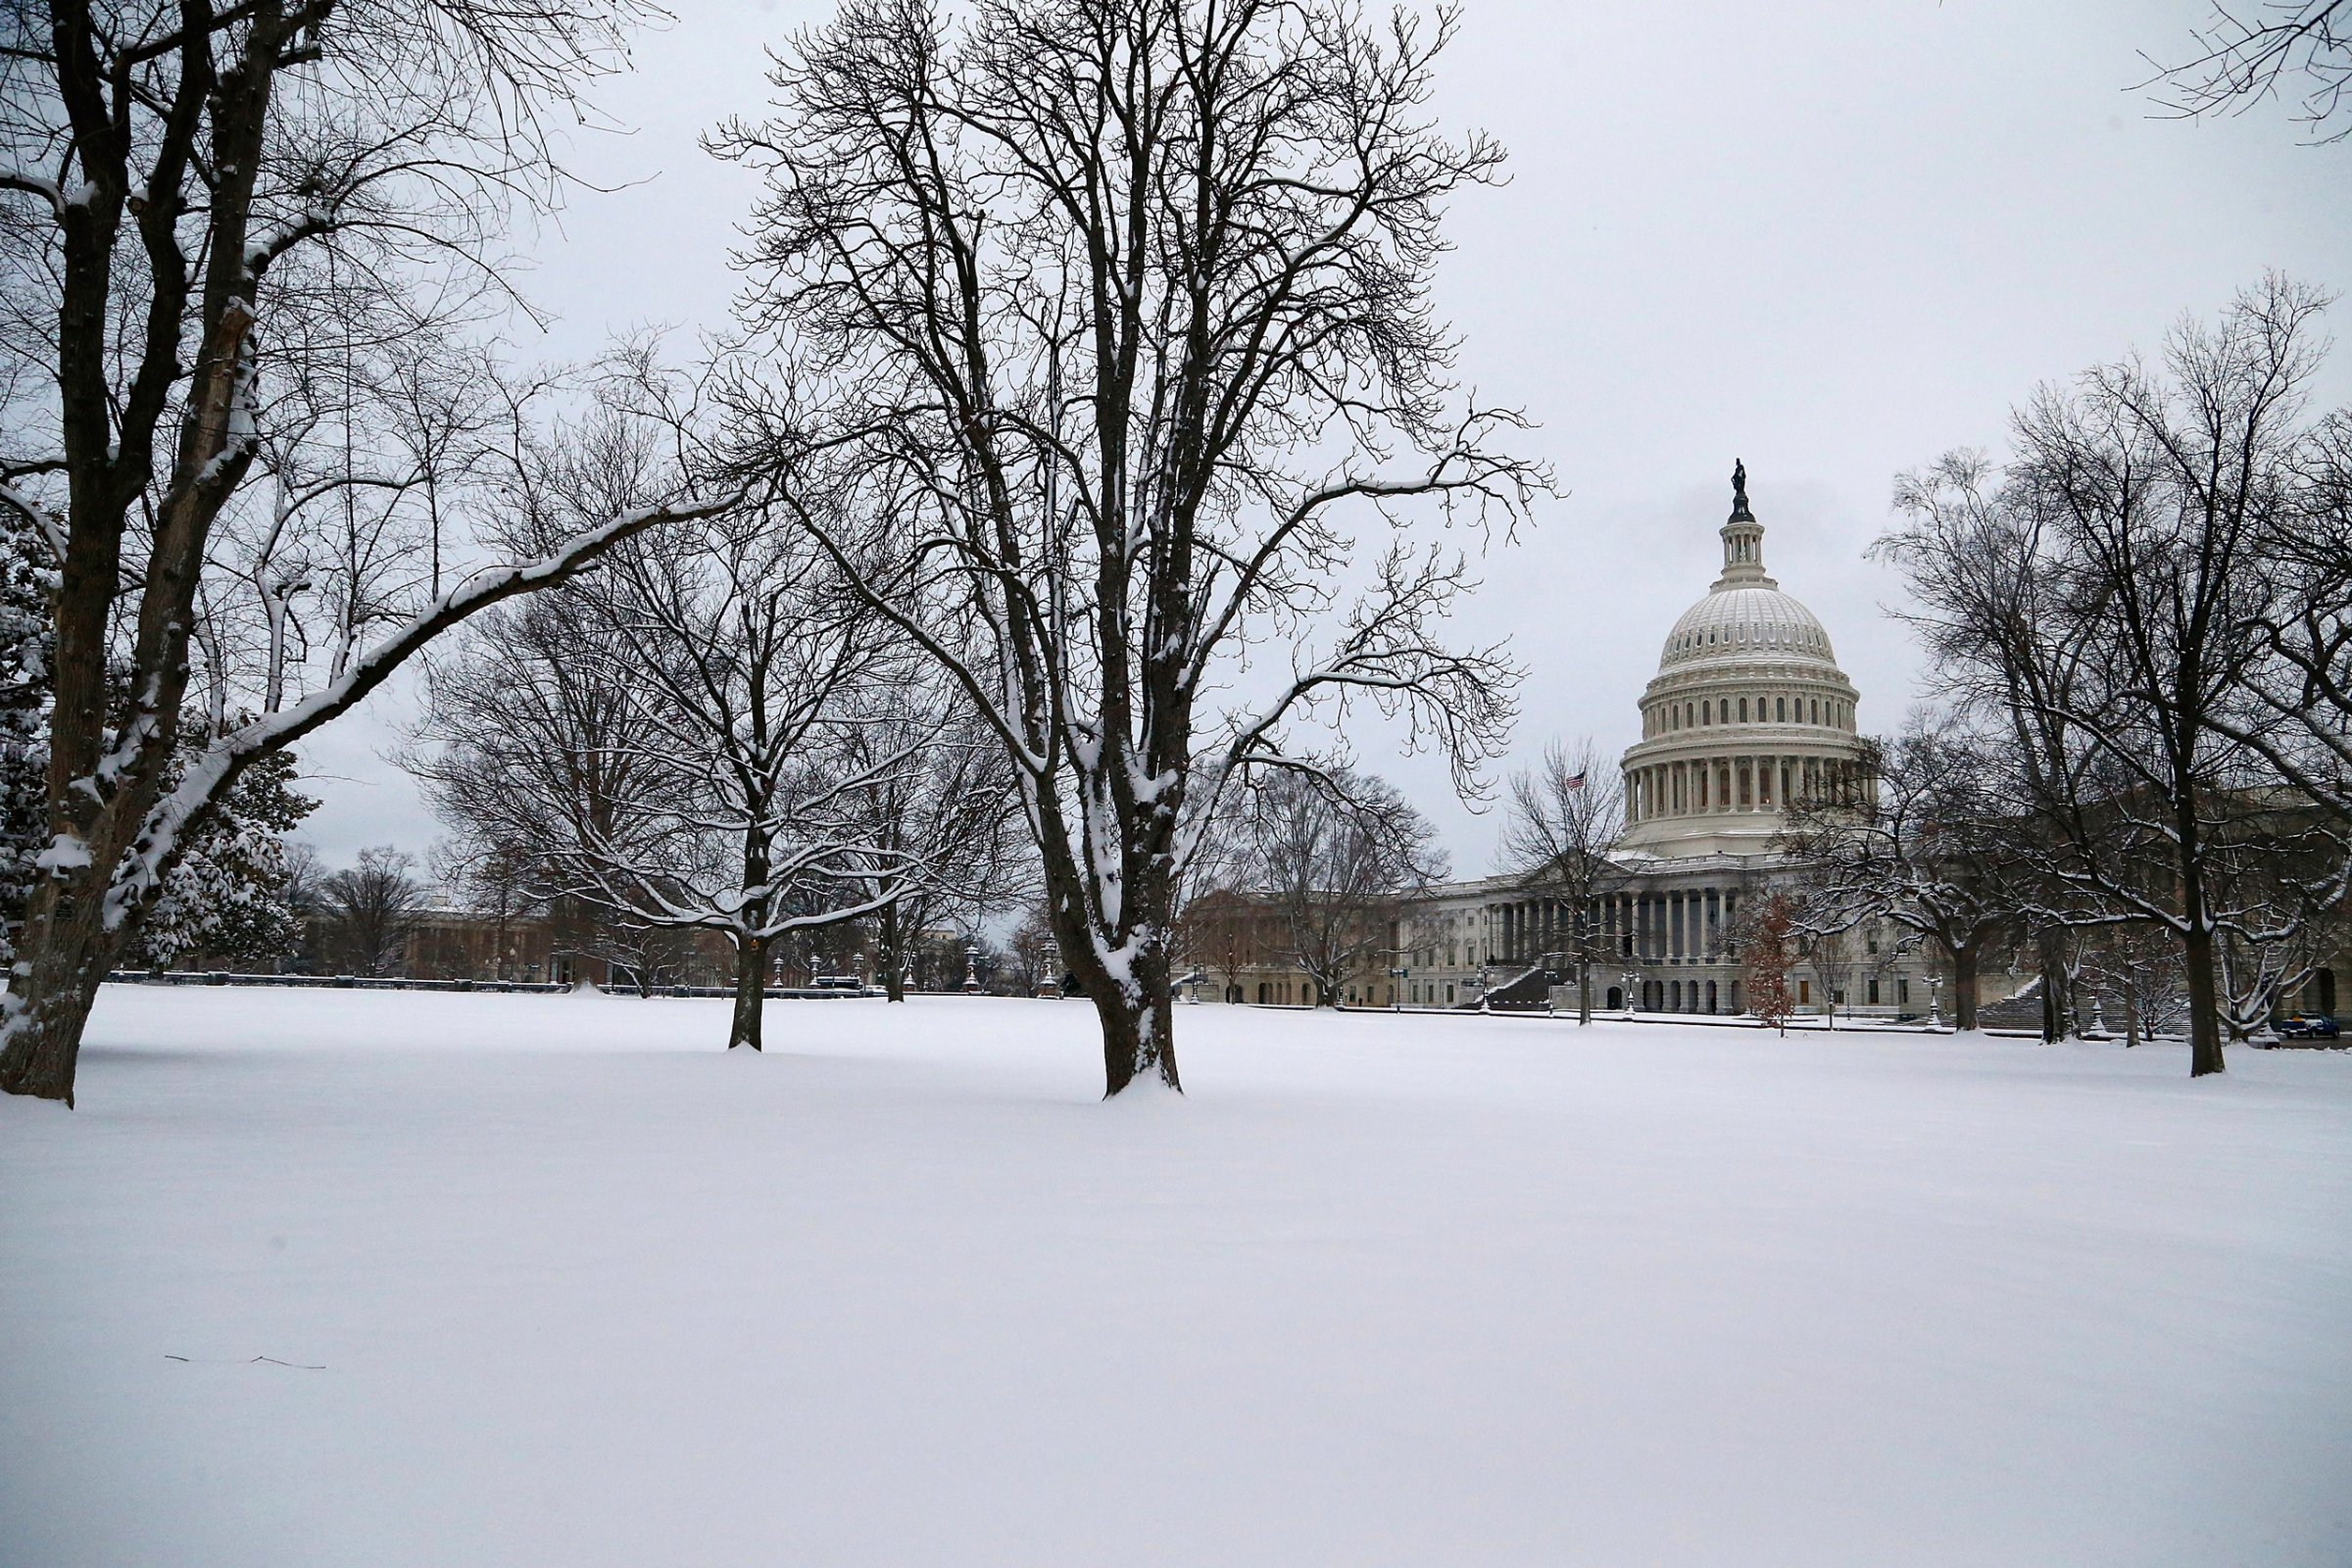 Several inches of fresh snow cover the lawn of the U.S. Capitol in Washington